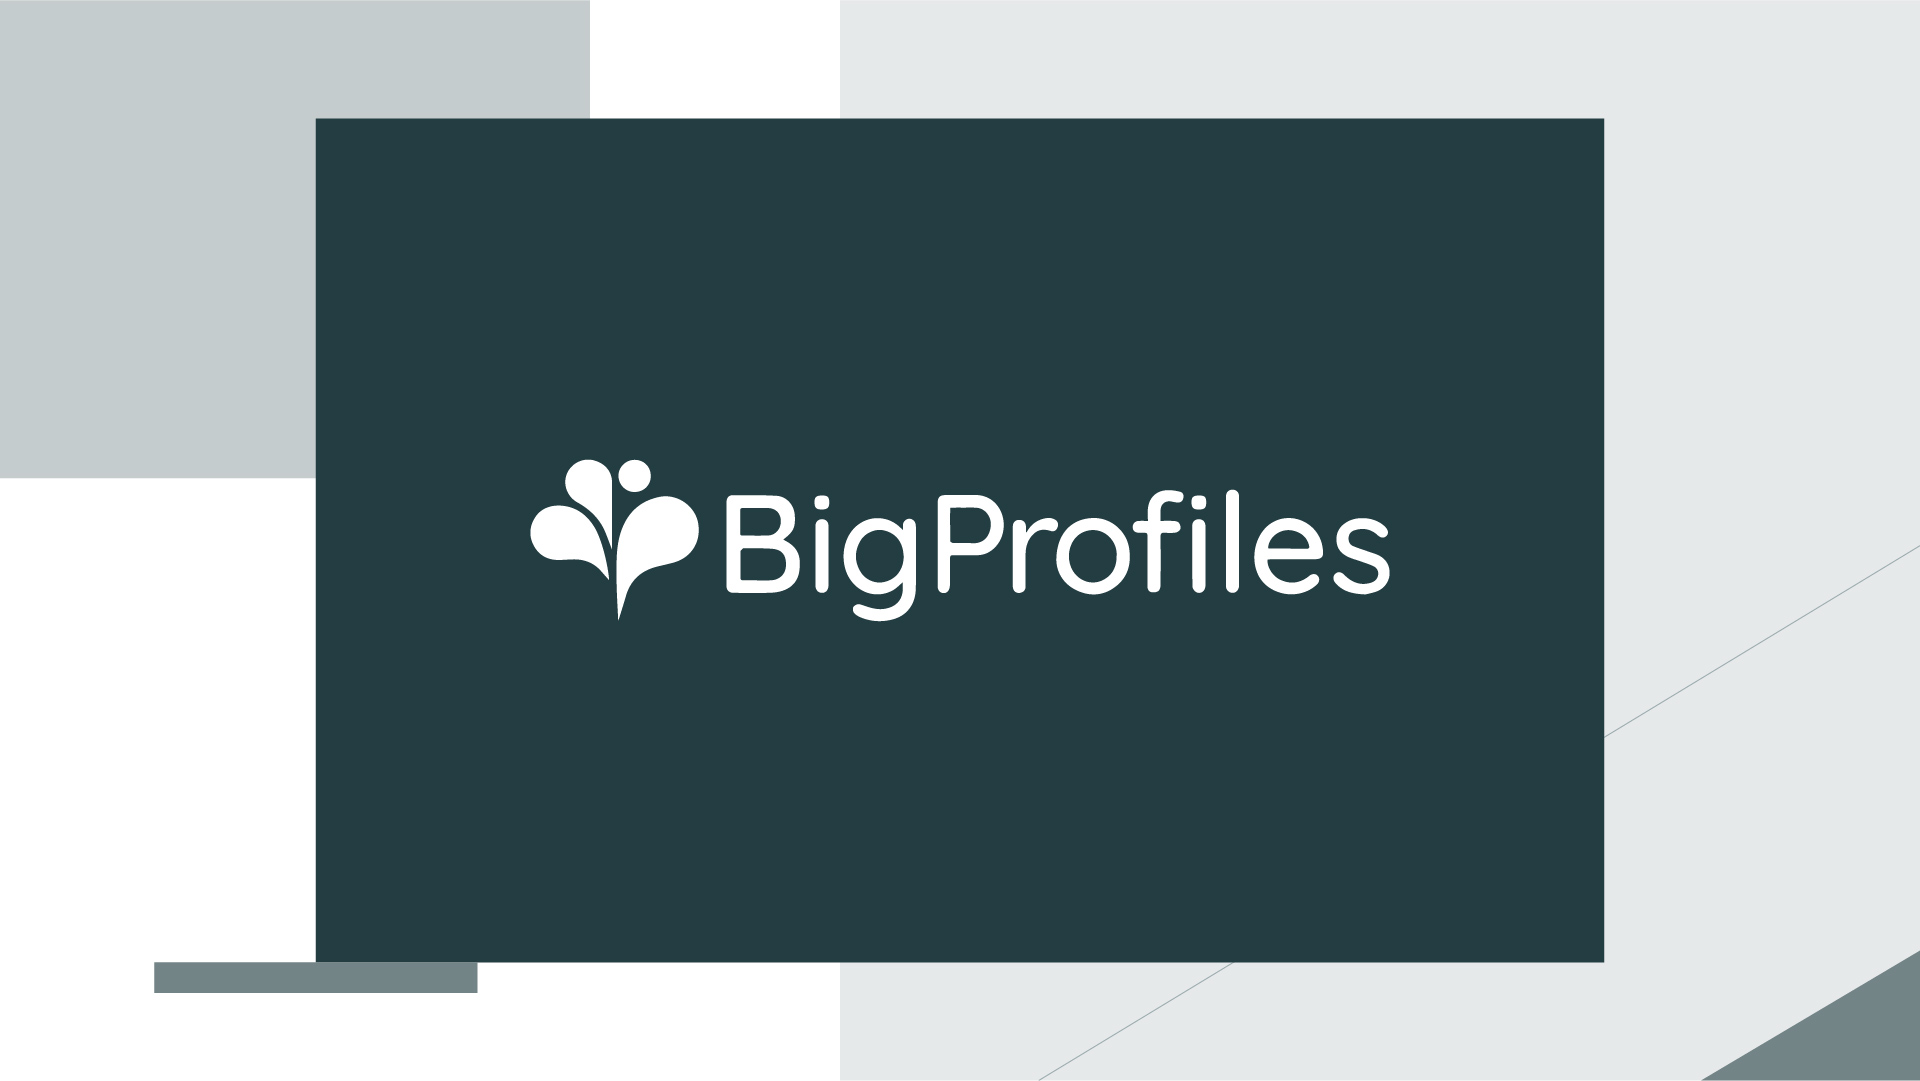 The marketing intelligence platform BigProfiles raises €1,5M in order to allow companies to increase their customer base